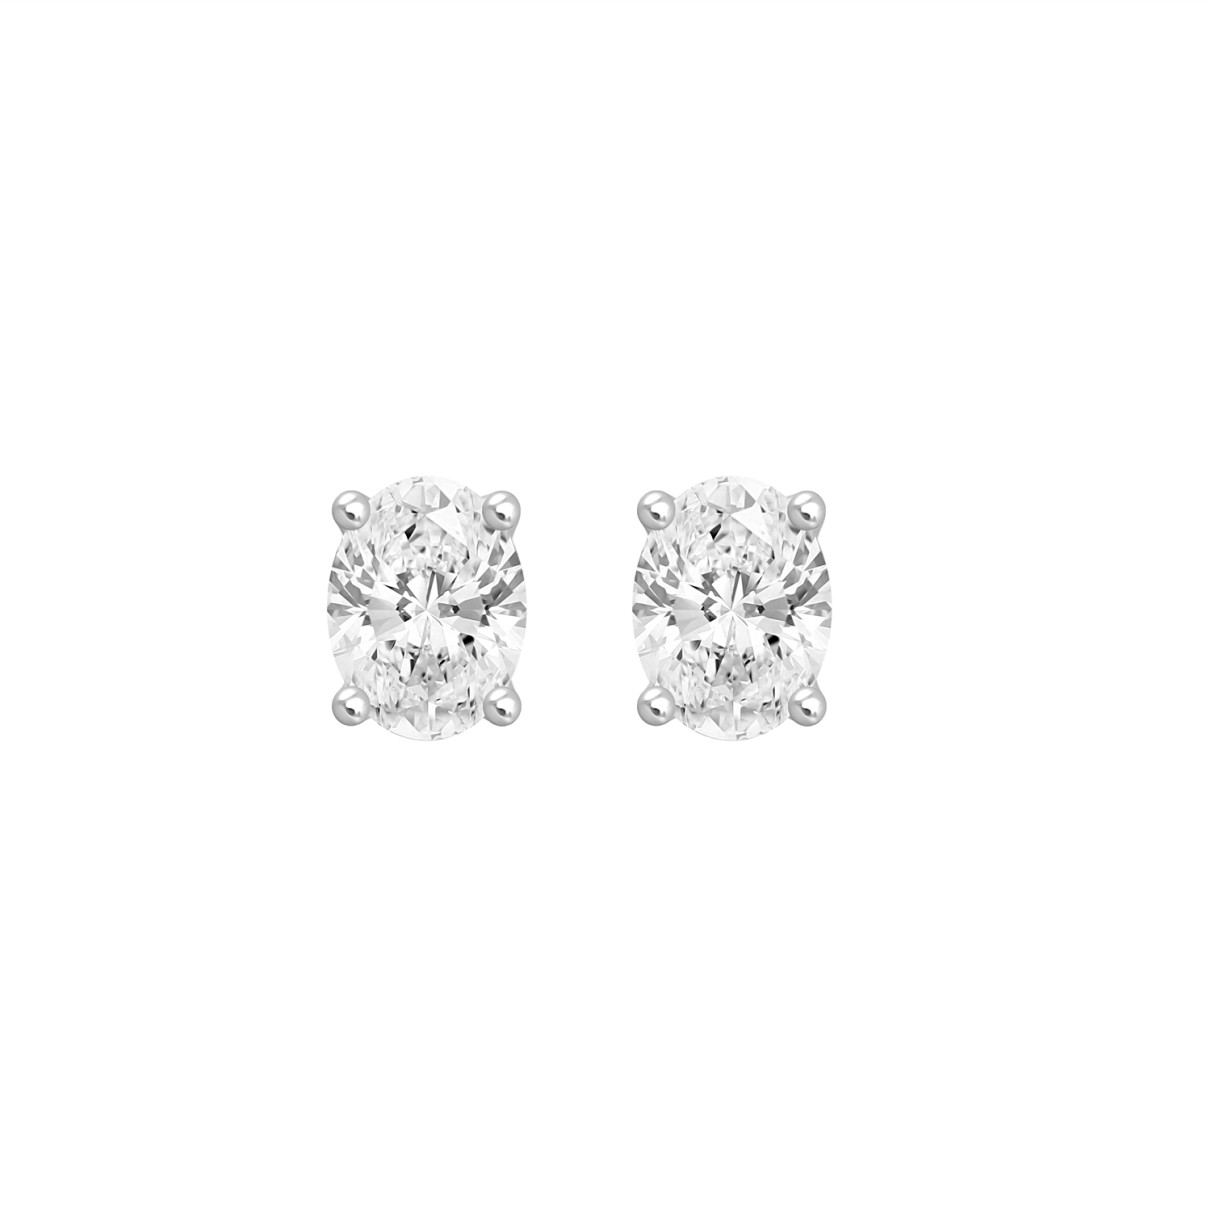 LADIES SOLITAIRE EARRINGS  1CT OVAL DIAMOND 14K WHITE GOLD